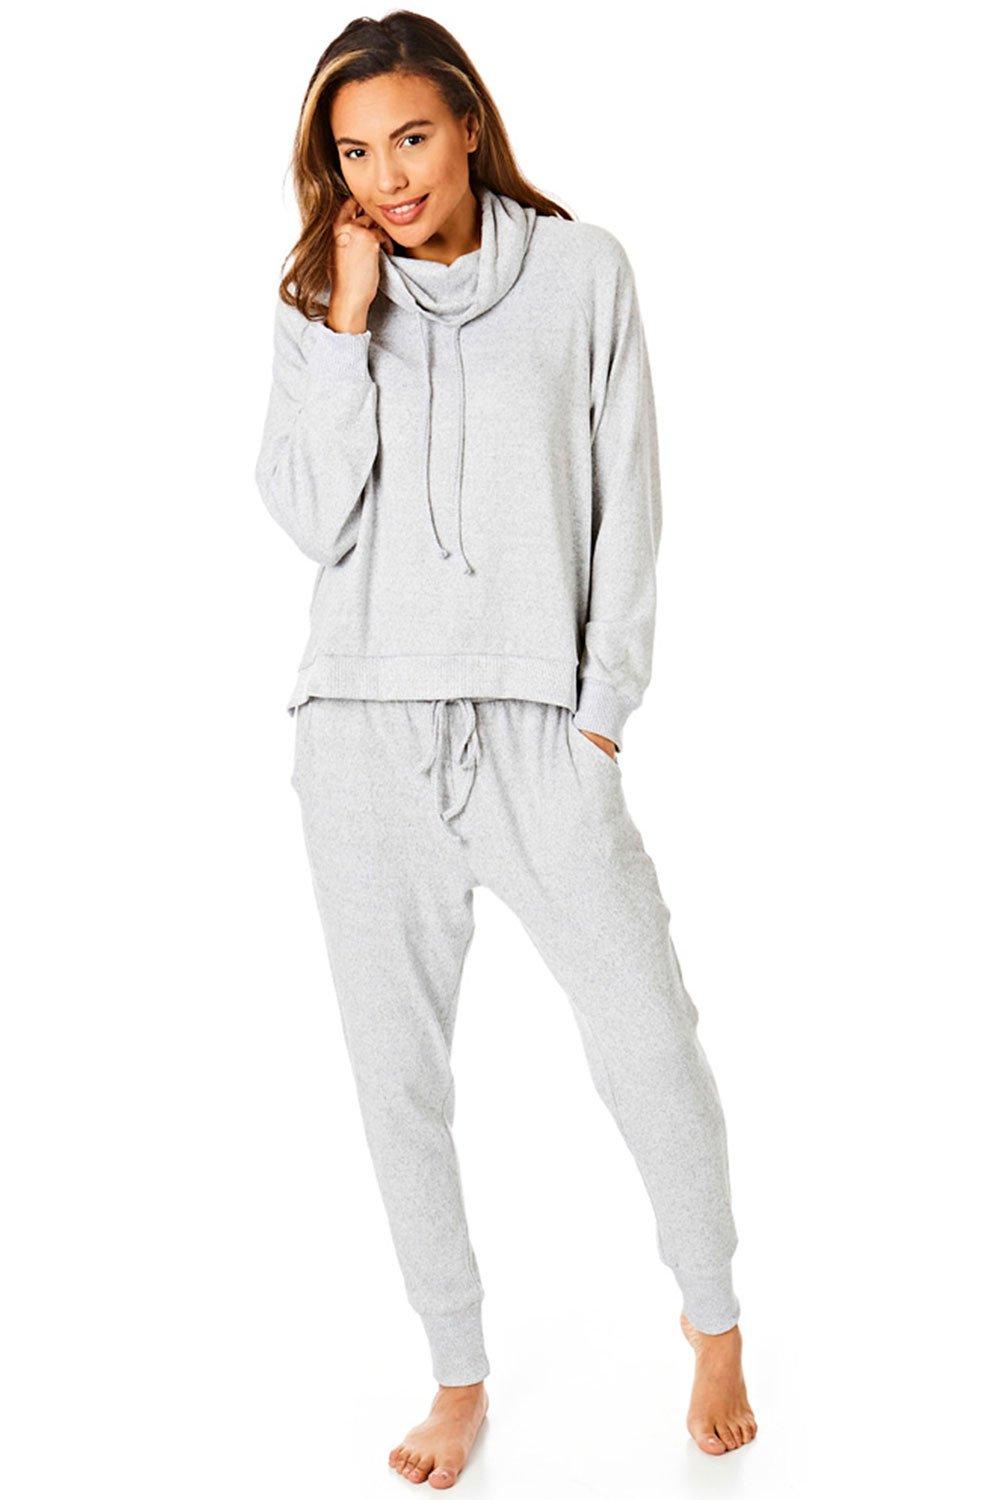 Knit Hooded Top & Joggers Twosie Set